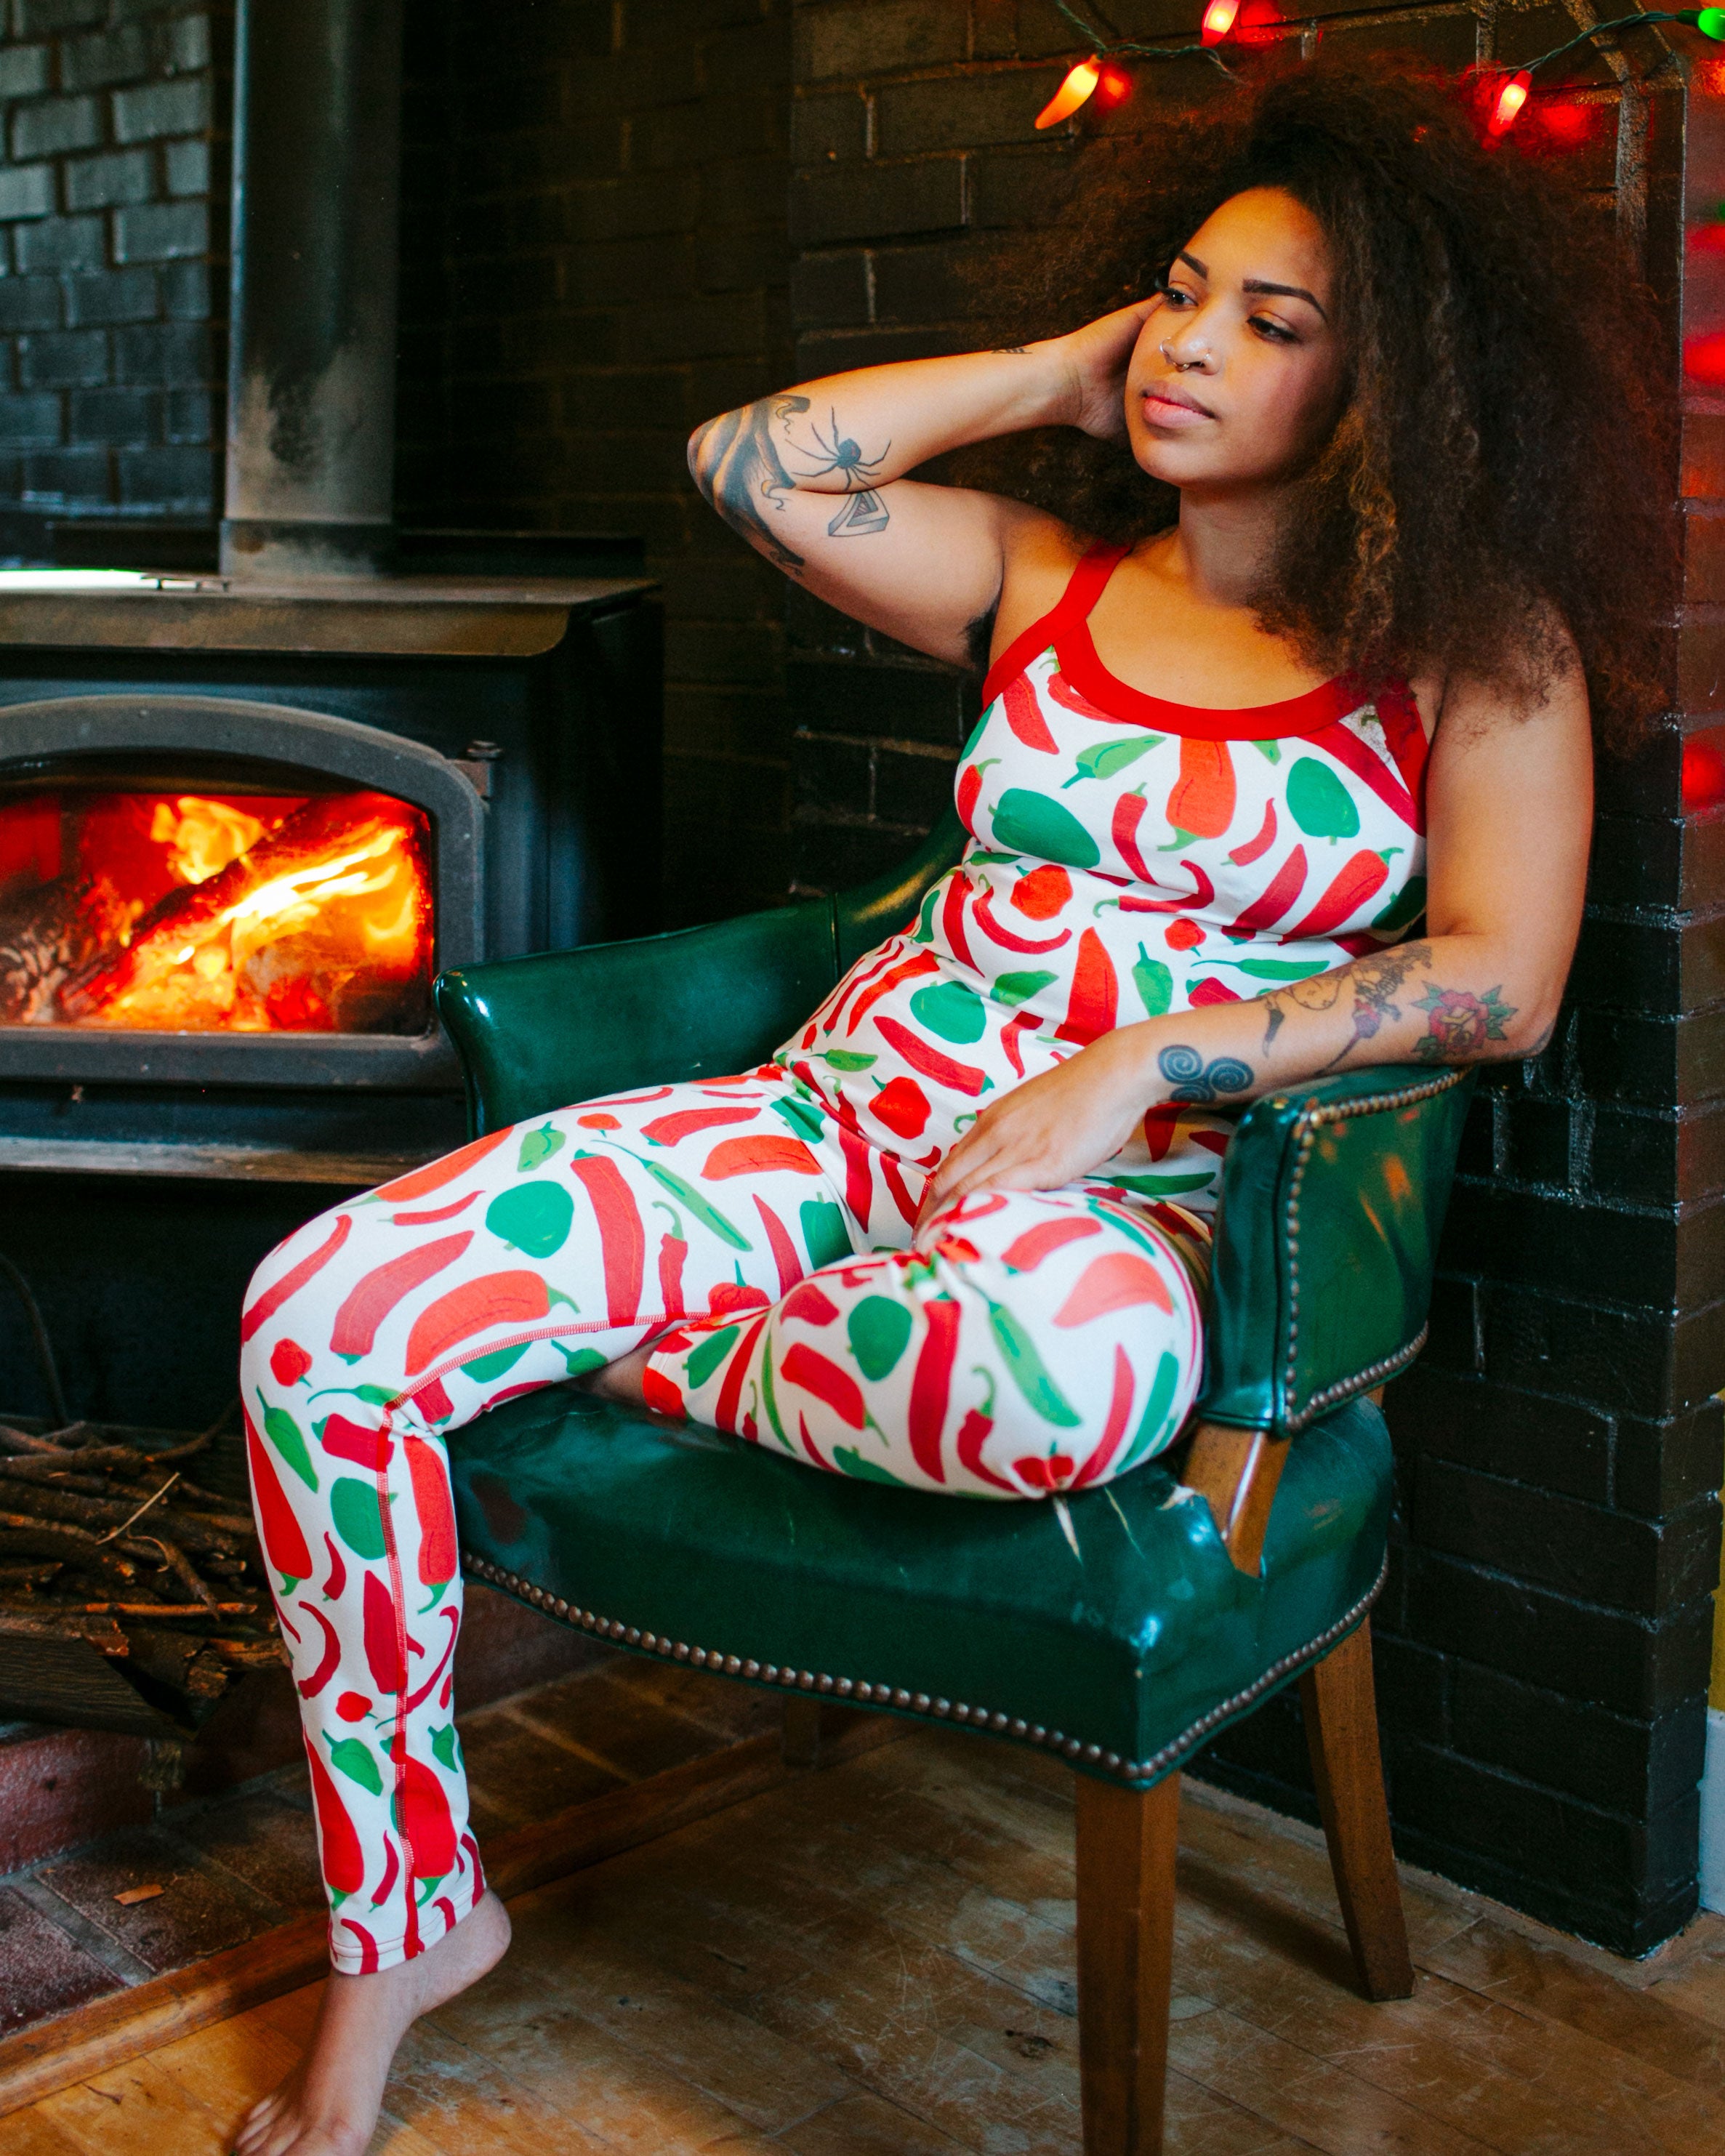 Model sitting by the fire inside wearing Thunderpants organic cotton Camisole and Leggings in our Hot Pants print: various green, orange, and red peppers printed on Vanilla with red binding.